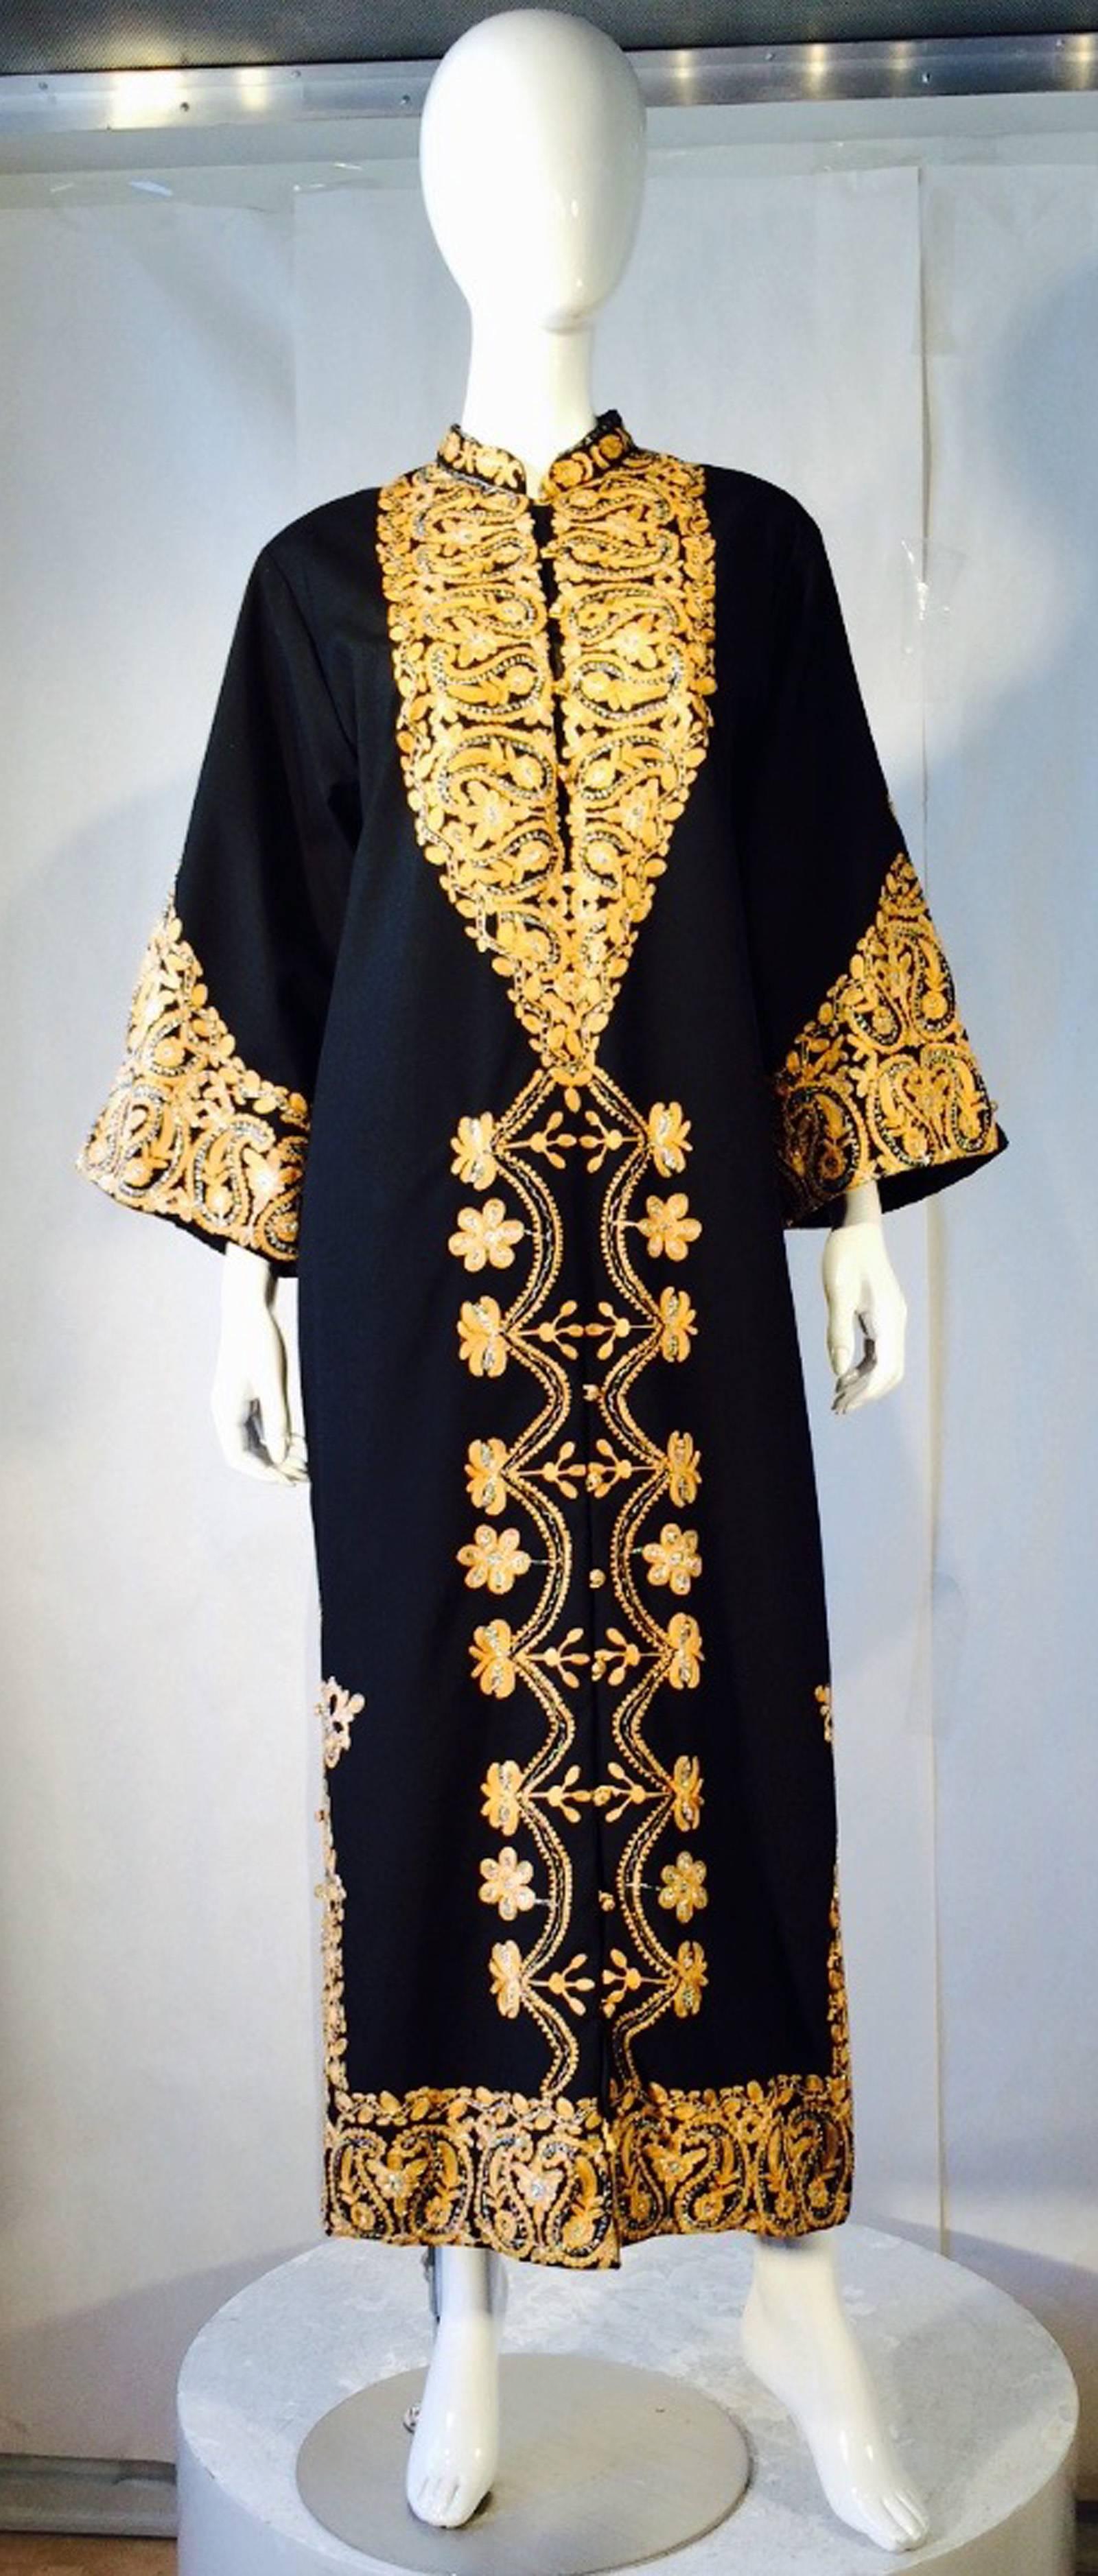 A fine vintage Moroccan caftan gifted by King Hassan II of Morocco. Authentic item presented at the Moroccan Embassy in Paris France, 1970. Black natural fiber item features elaborate metallic embroidery front and back. Item buttons down front